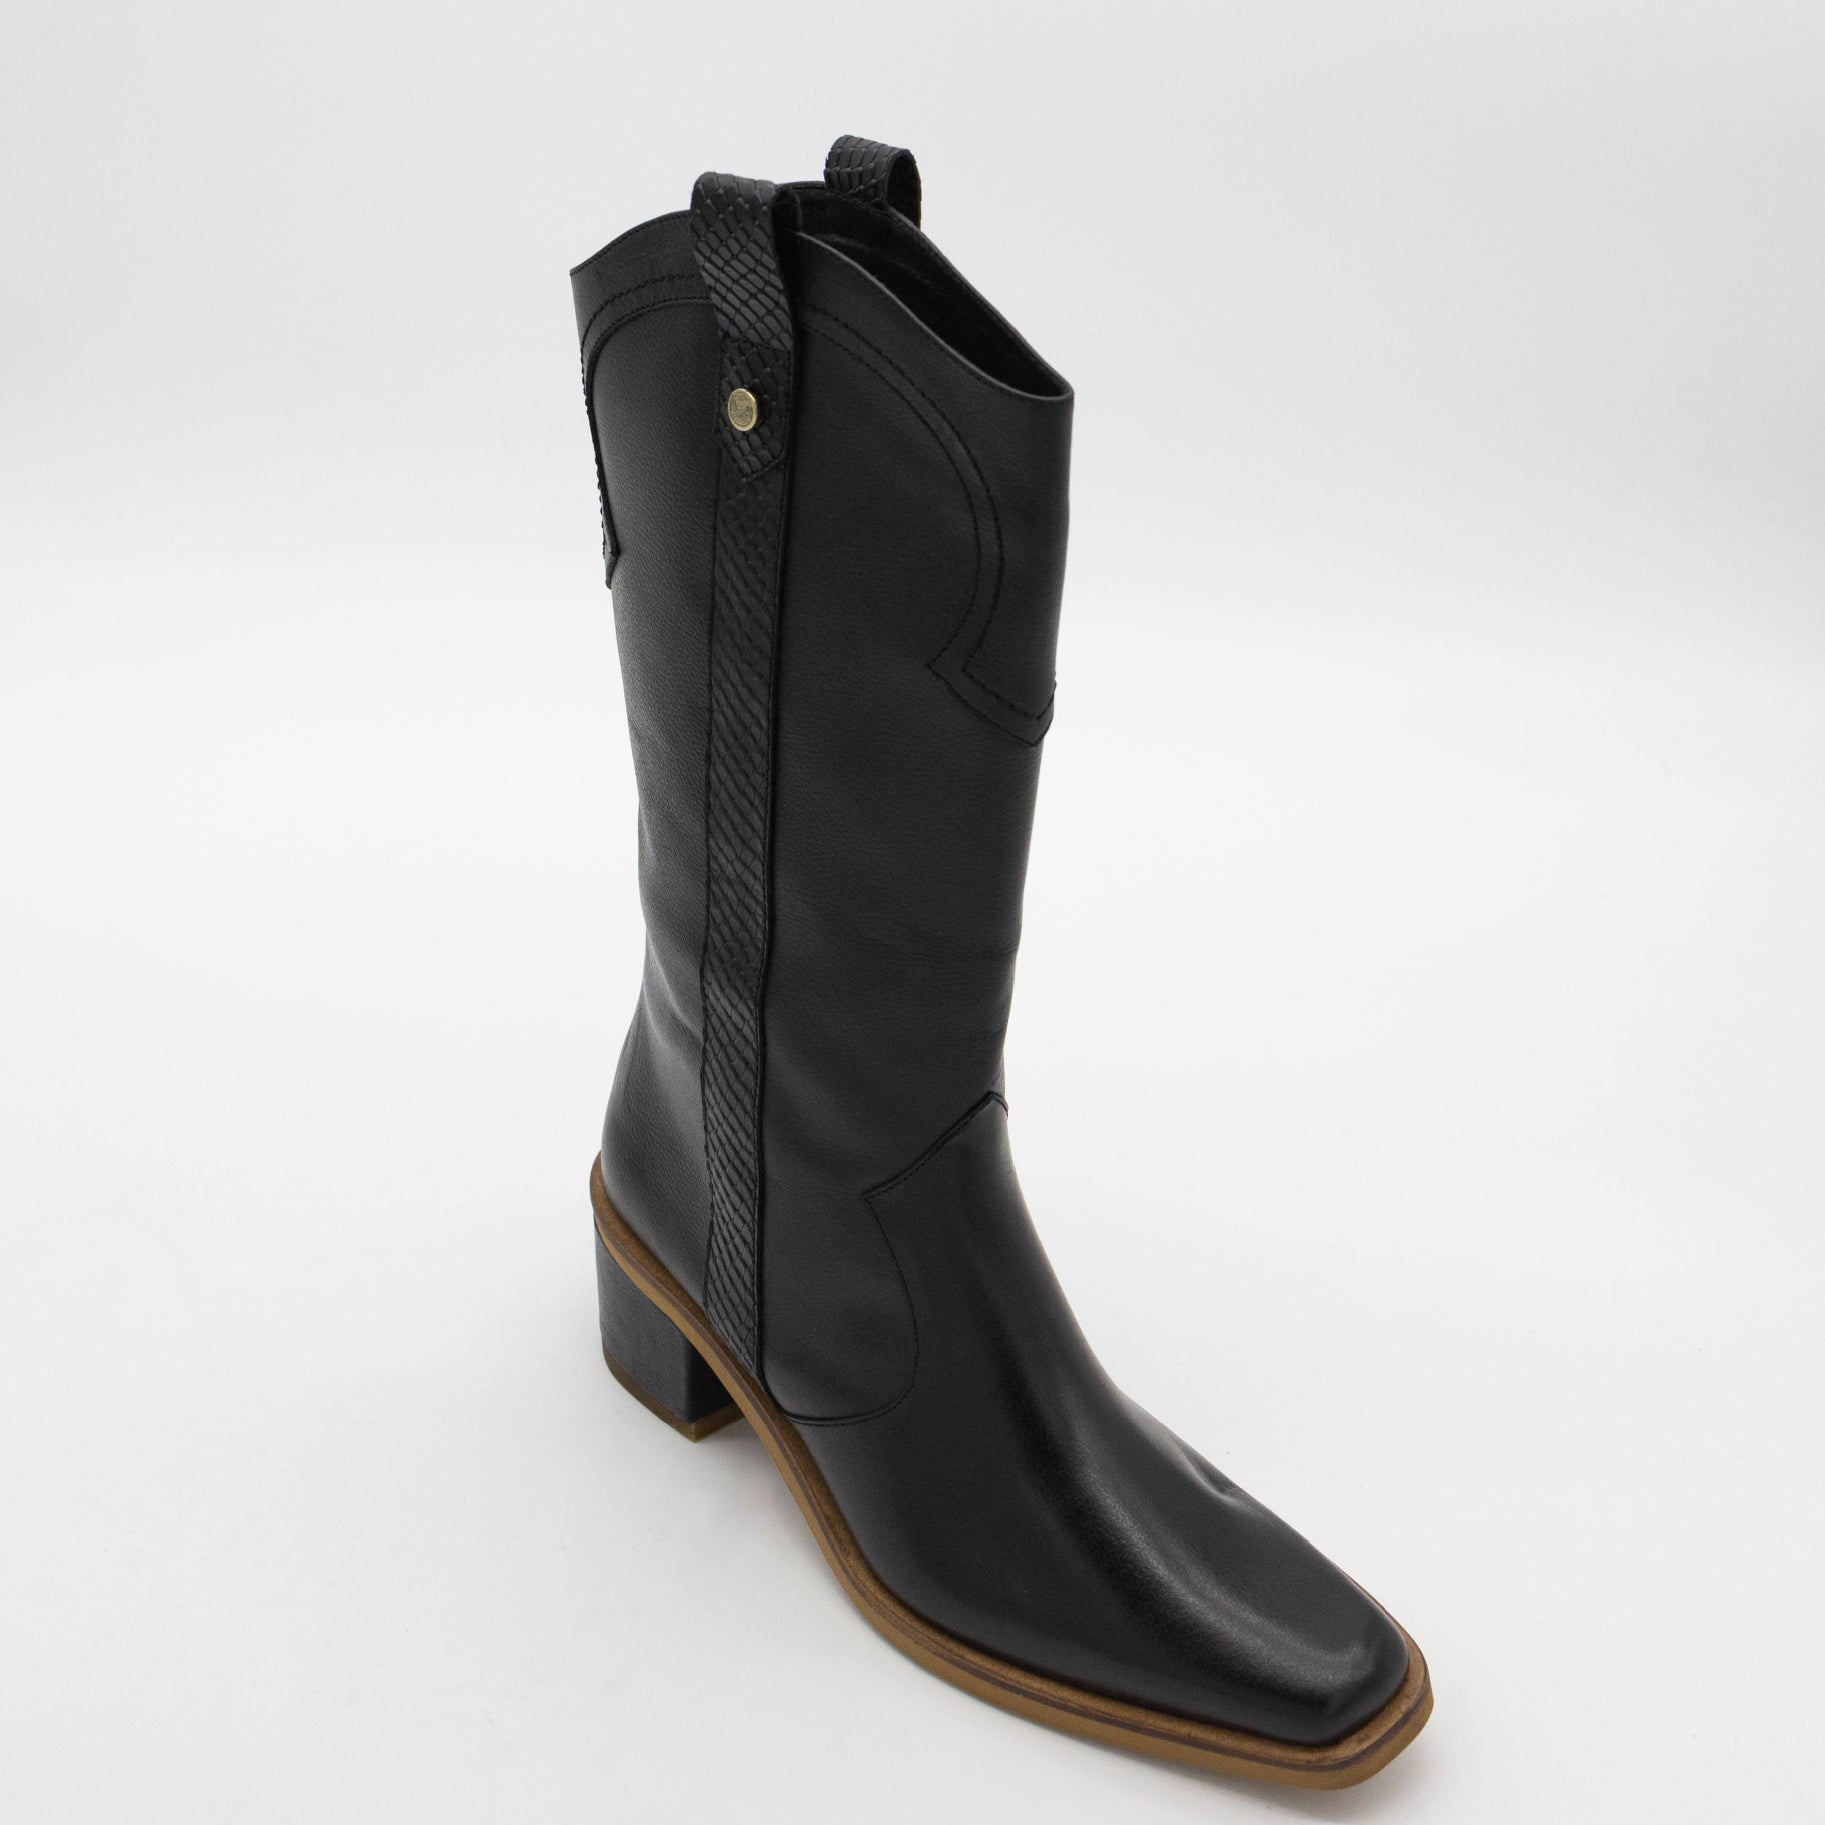 Western inspired, Black smooth leather with embossed snakeskin. Stivali New York